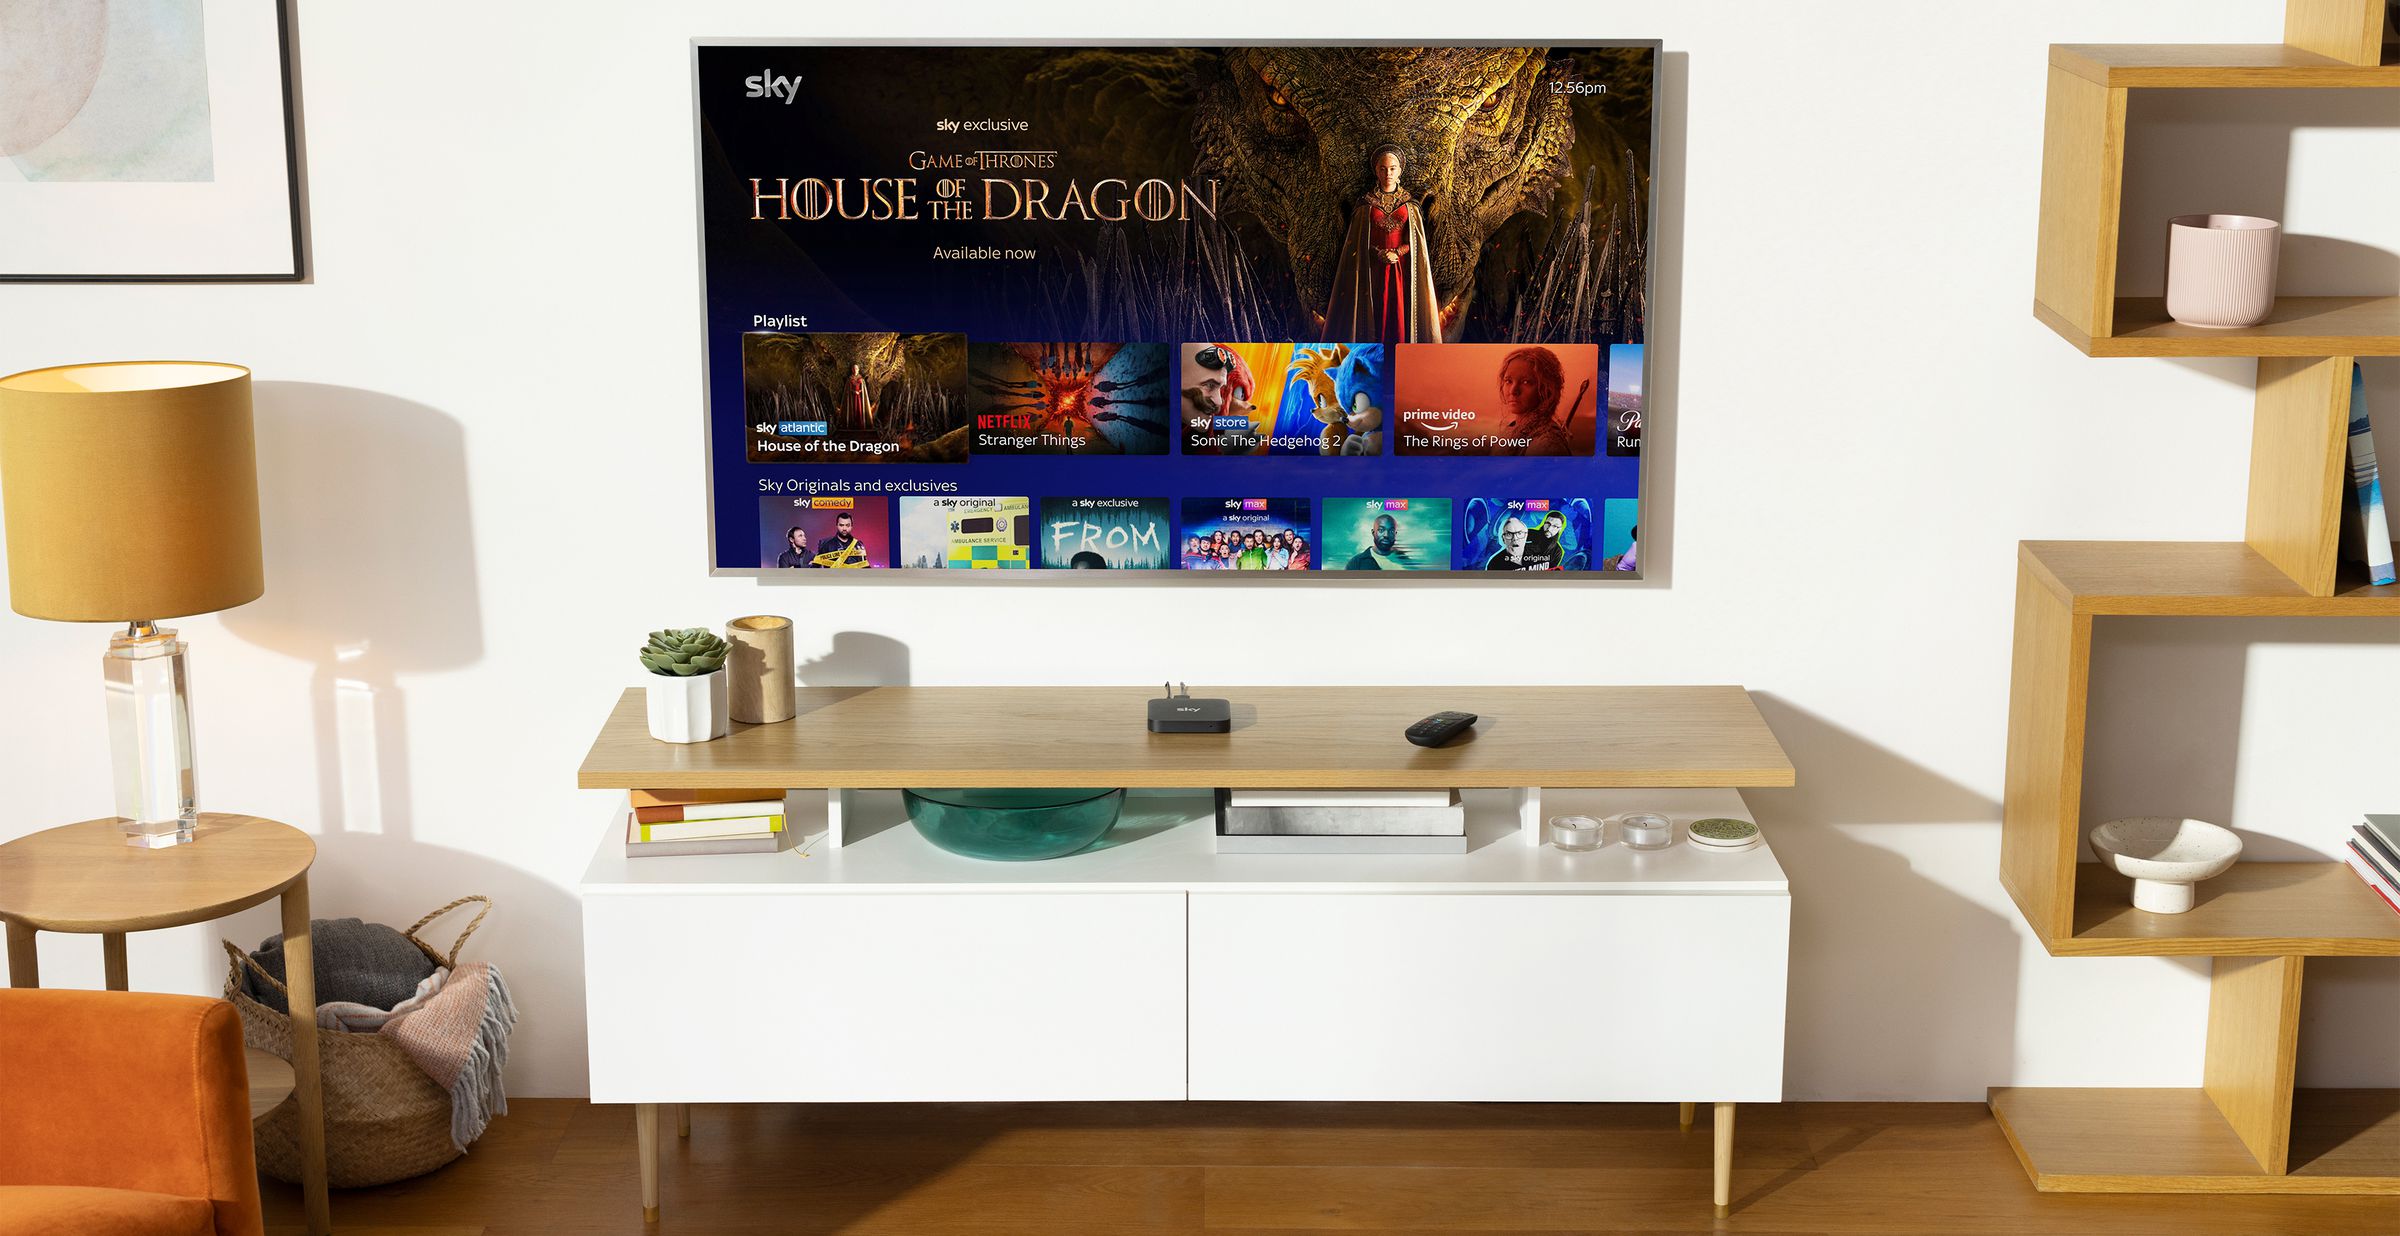 Sky Stream has the same interface as Sky Glass in a living room environment